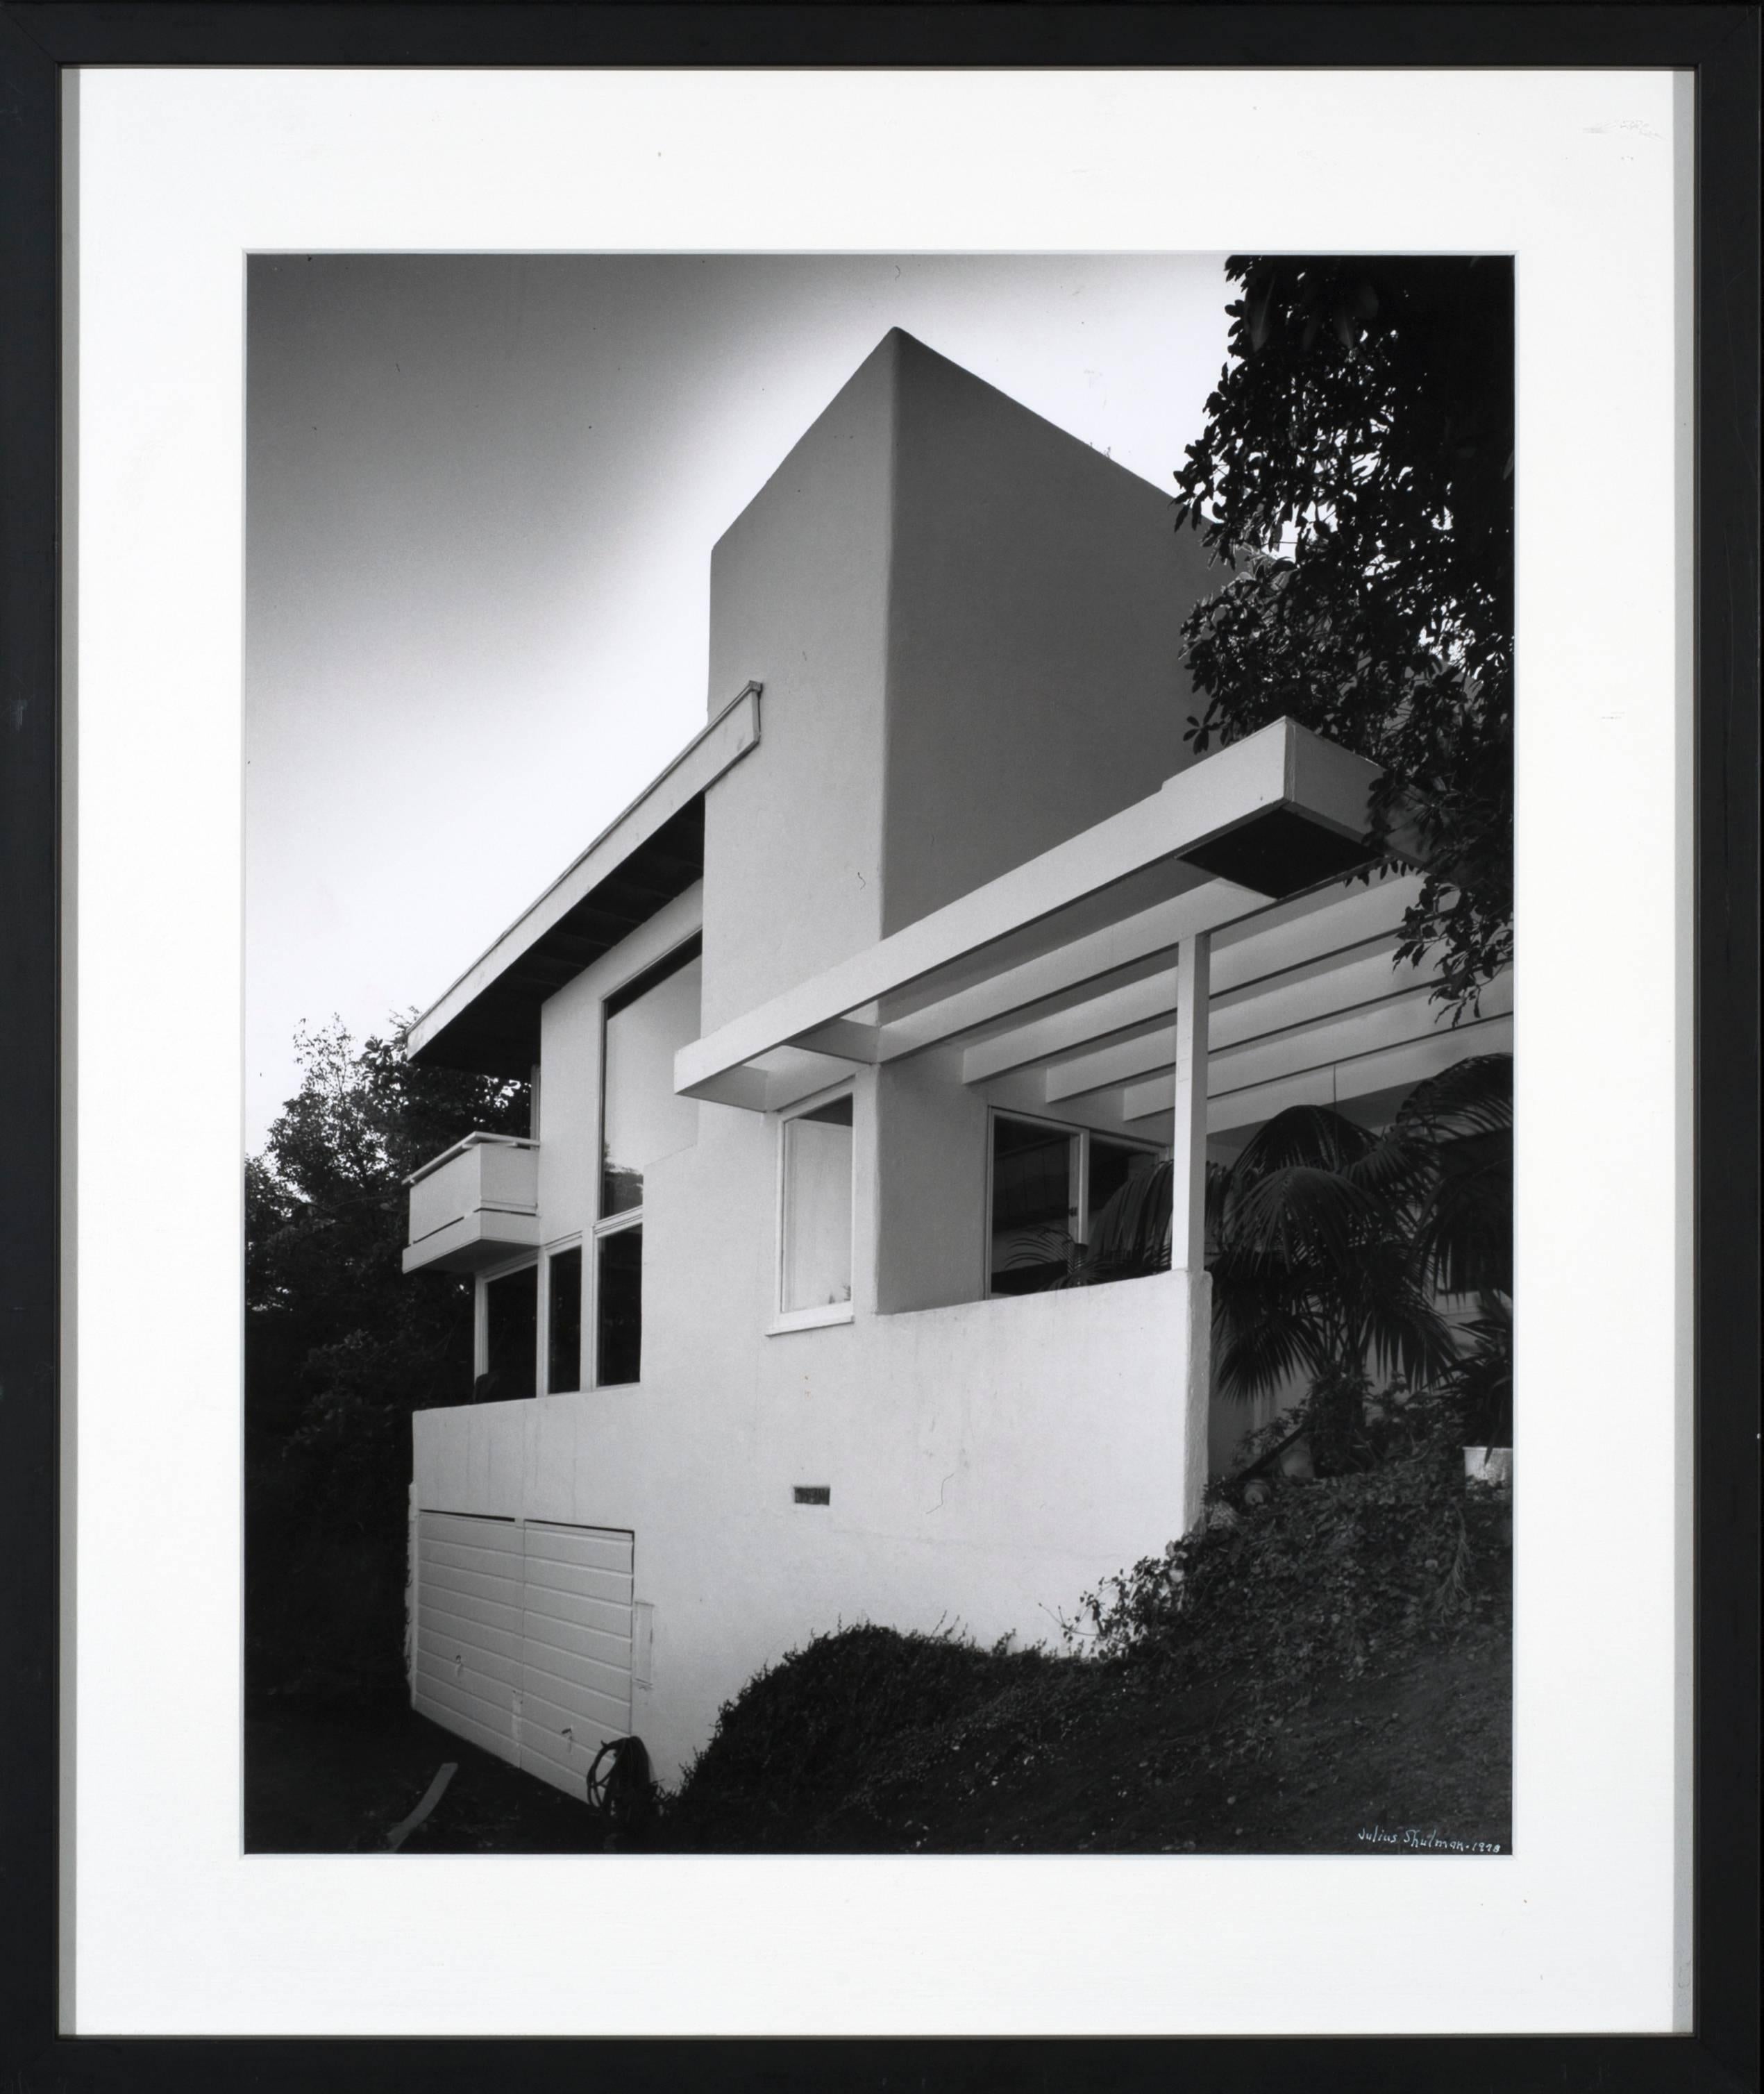 Large and original silver gelatin print by Julius Shulman (American, b.1910-2009) of the Droste house designed by R. M. Schindler in 1940. Print is signed in white ink and dated 1978. This is a rare and unique print from an exhibit curated by Julius